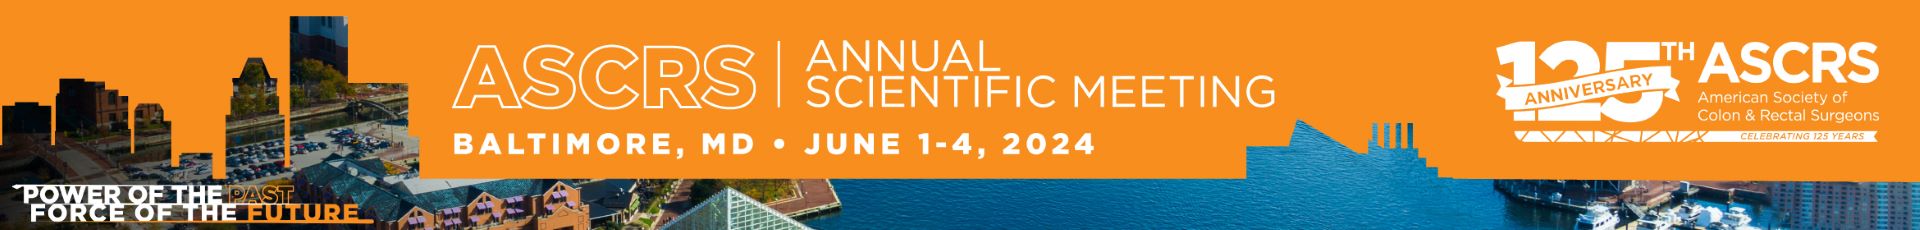 ASCRS 2024 Annual Scientific Meeting Abstract Event Banner